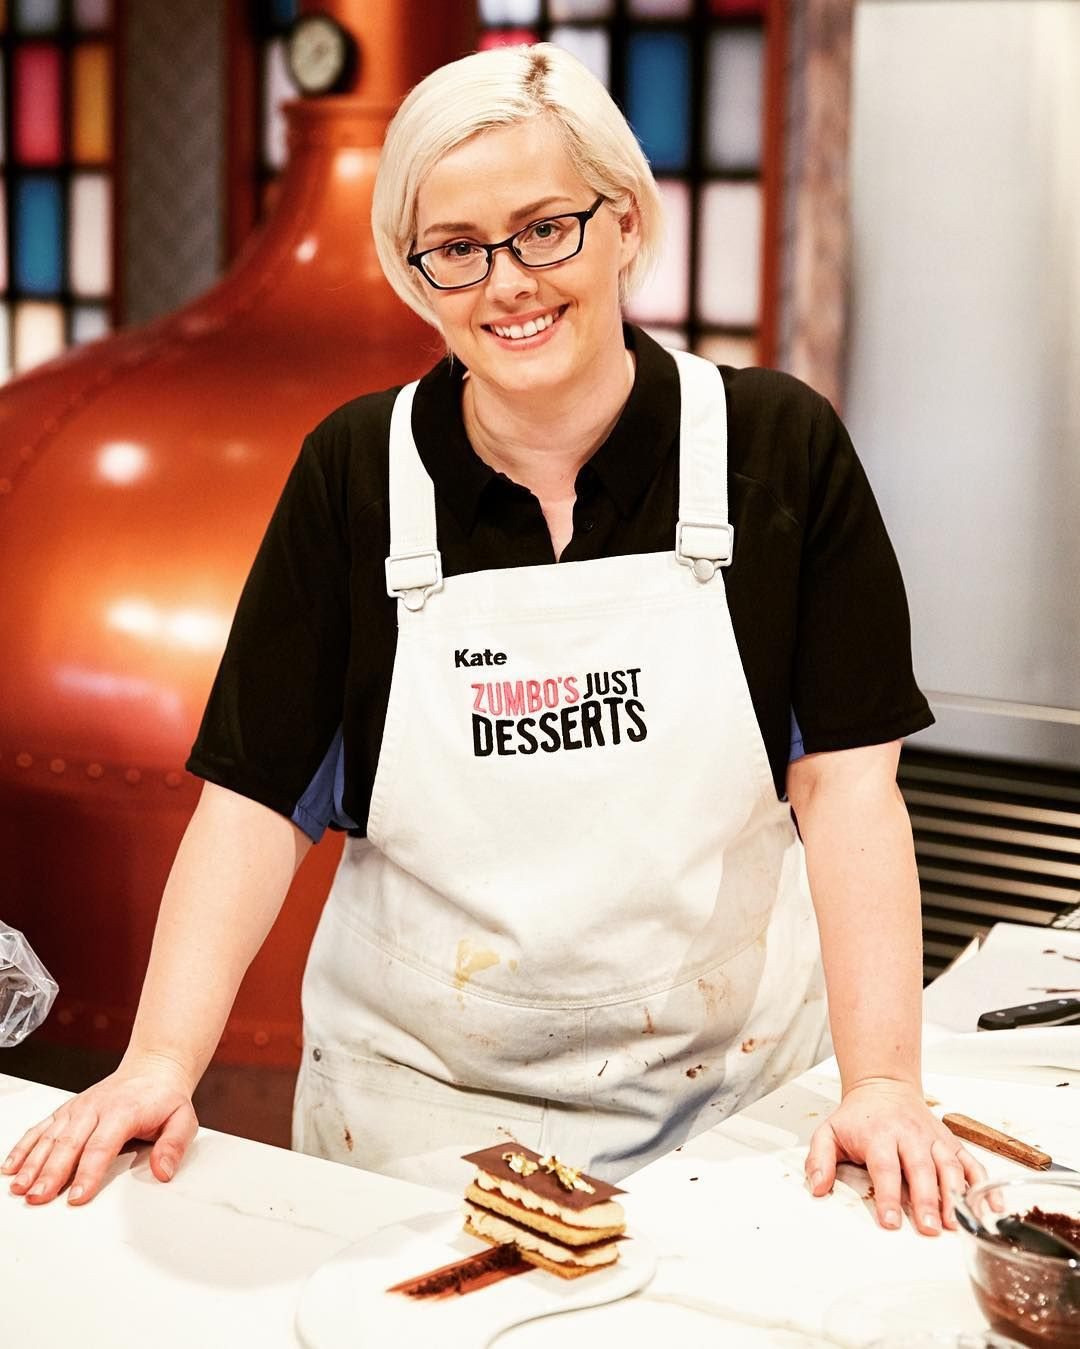 Kate From Zumbo'S Just Desserts
 Good luck in Finals week Kate Zumbo’s Just Desserts